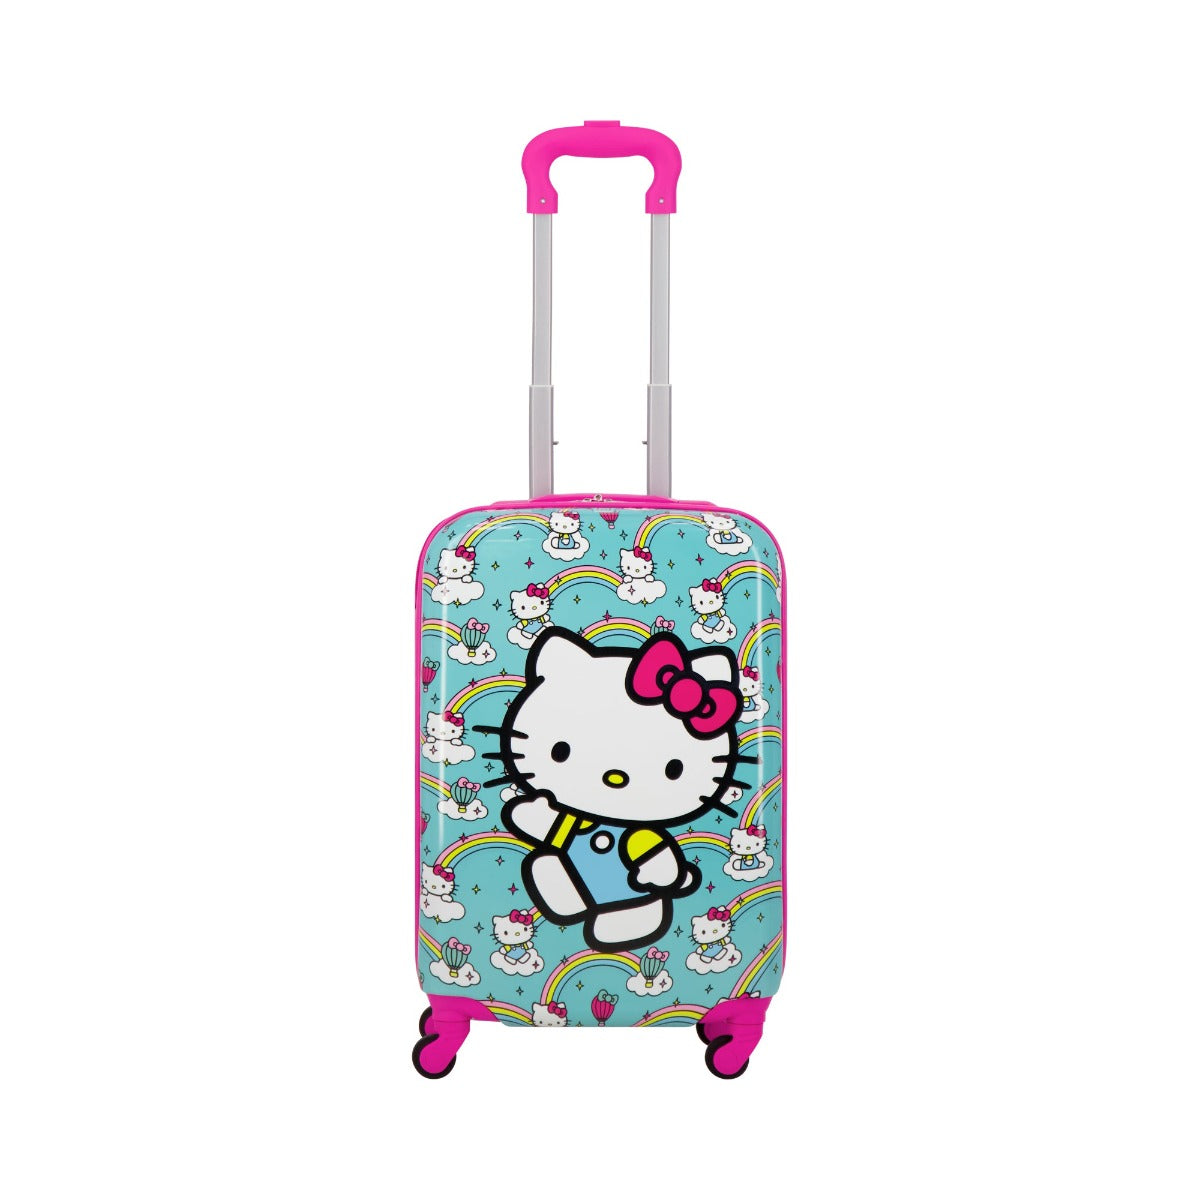 Hello Kitty Ful Rainbows 21 inch carry-on luggage for kids